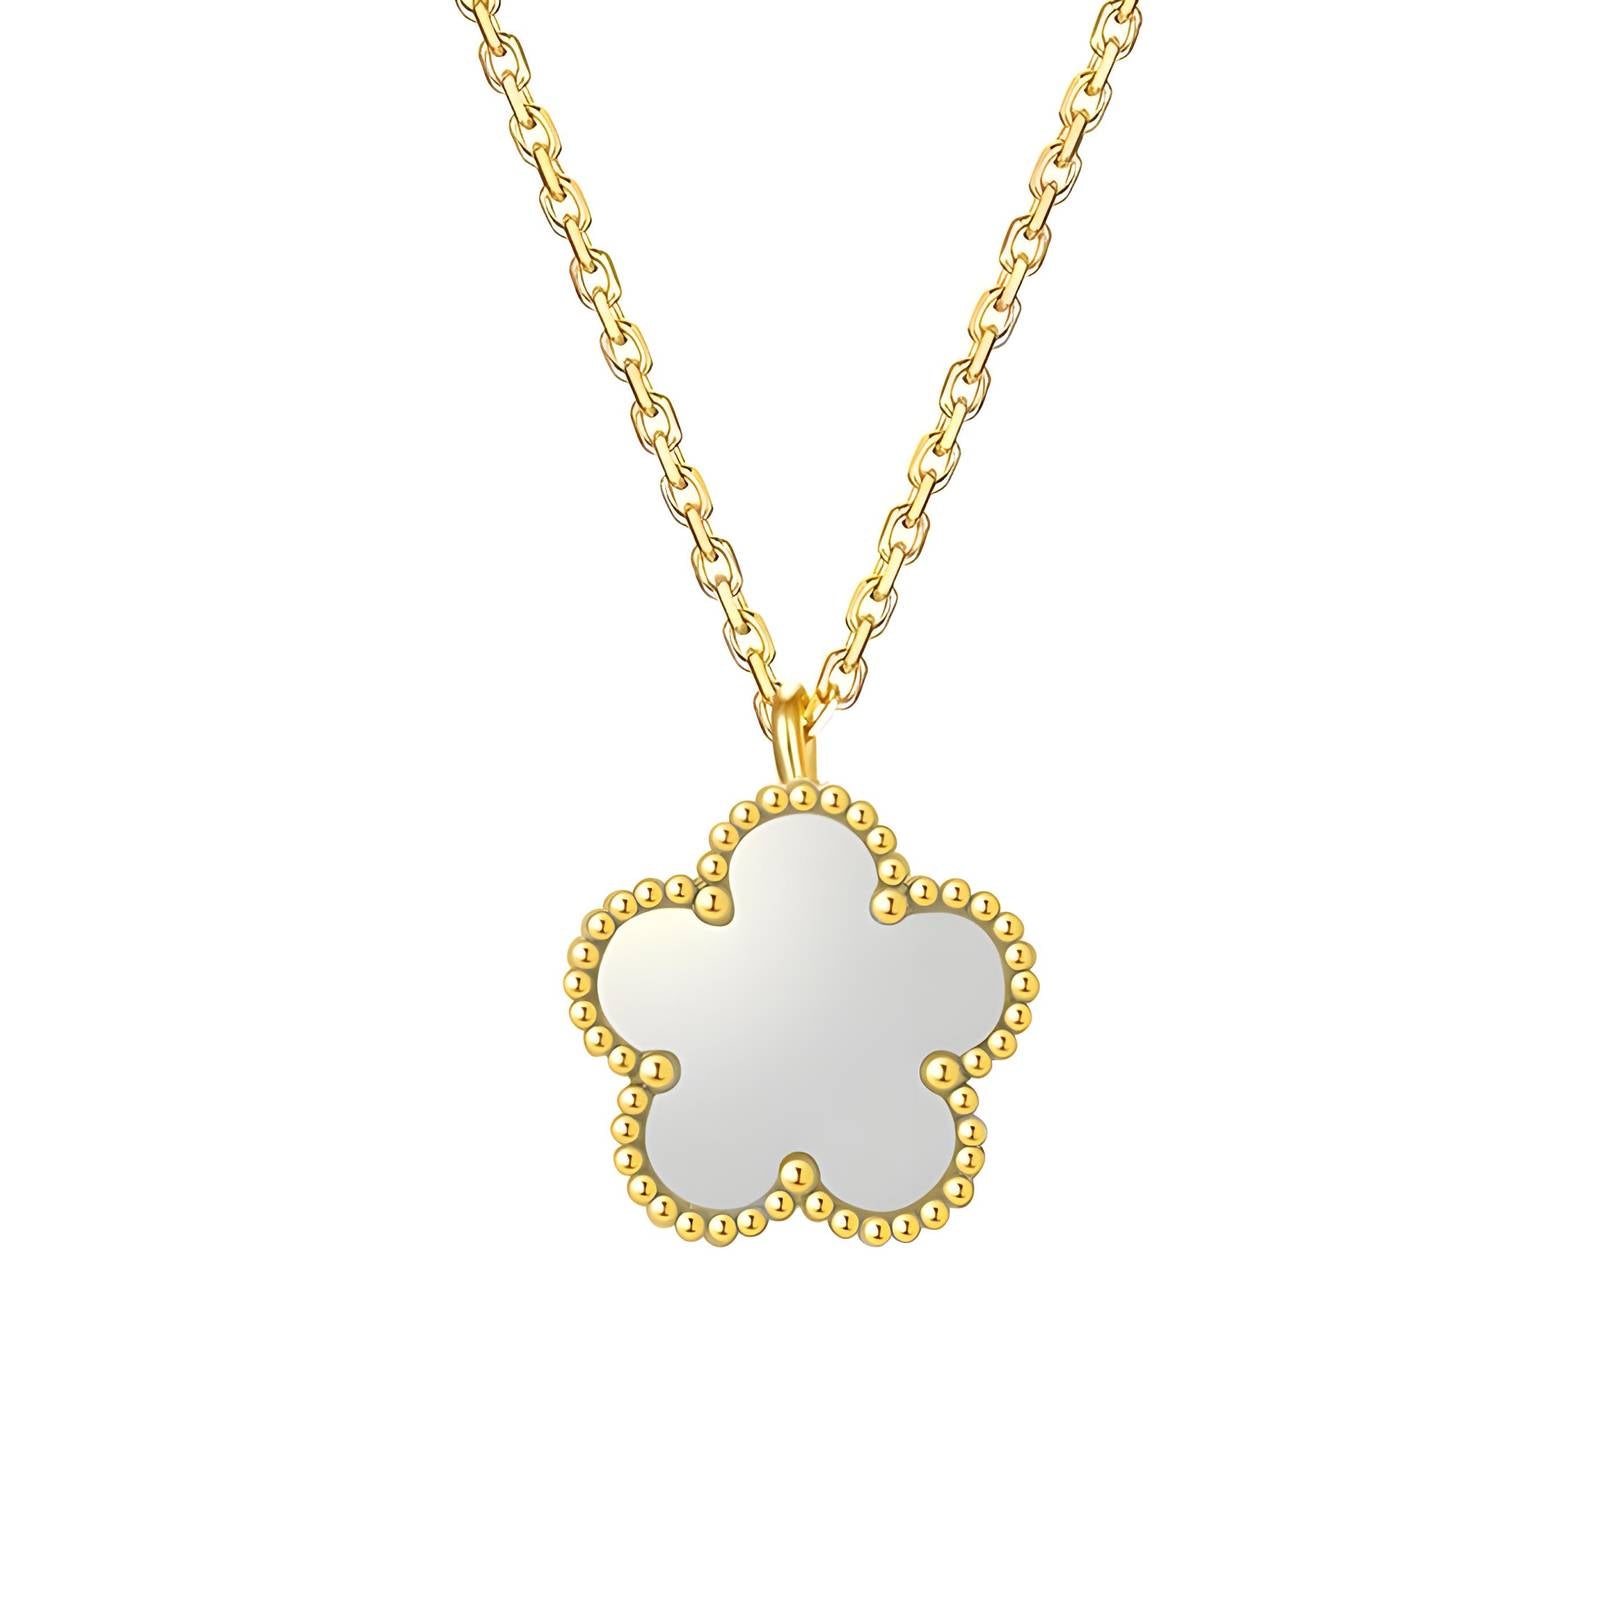 Five Pearl Clover Necklace